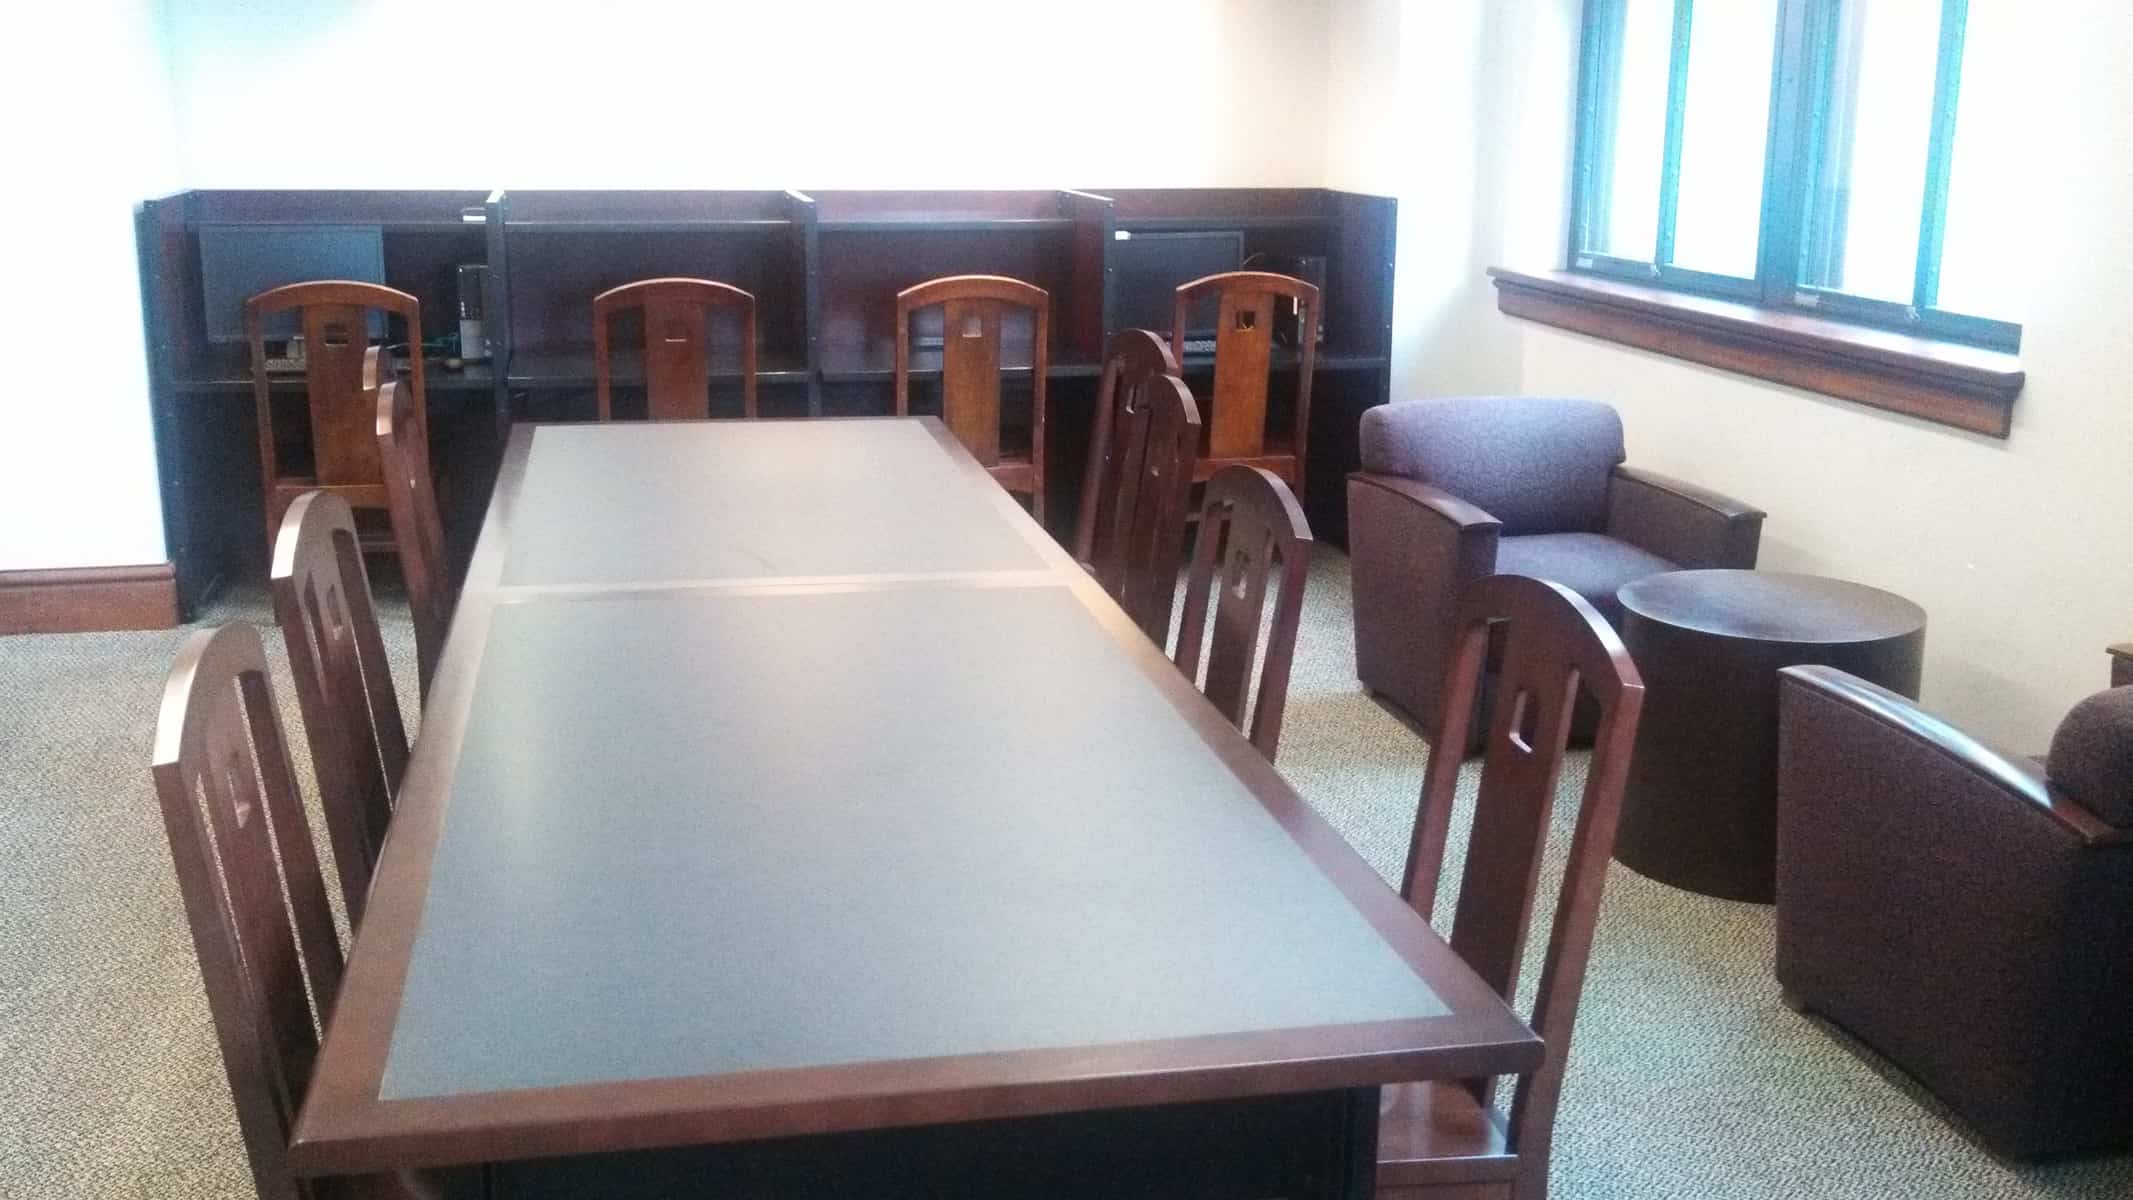 Group study tables